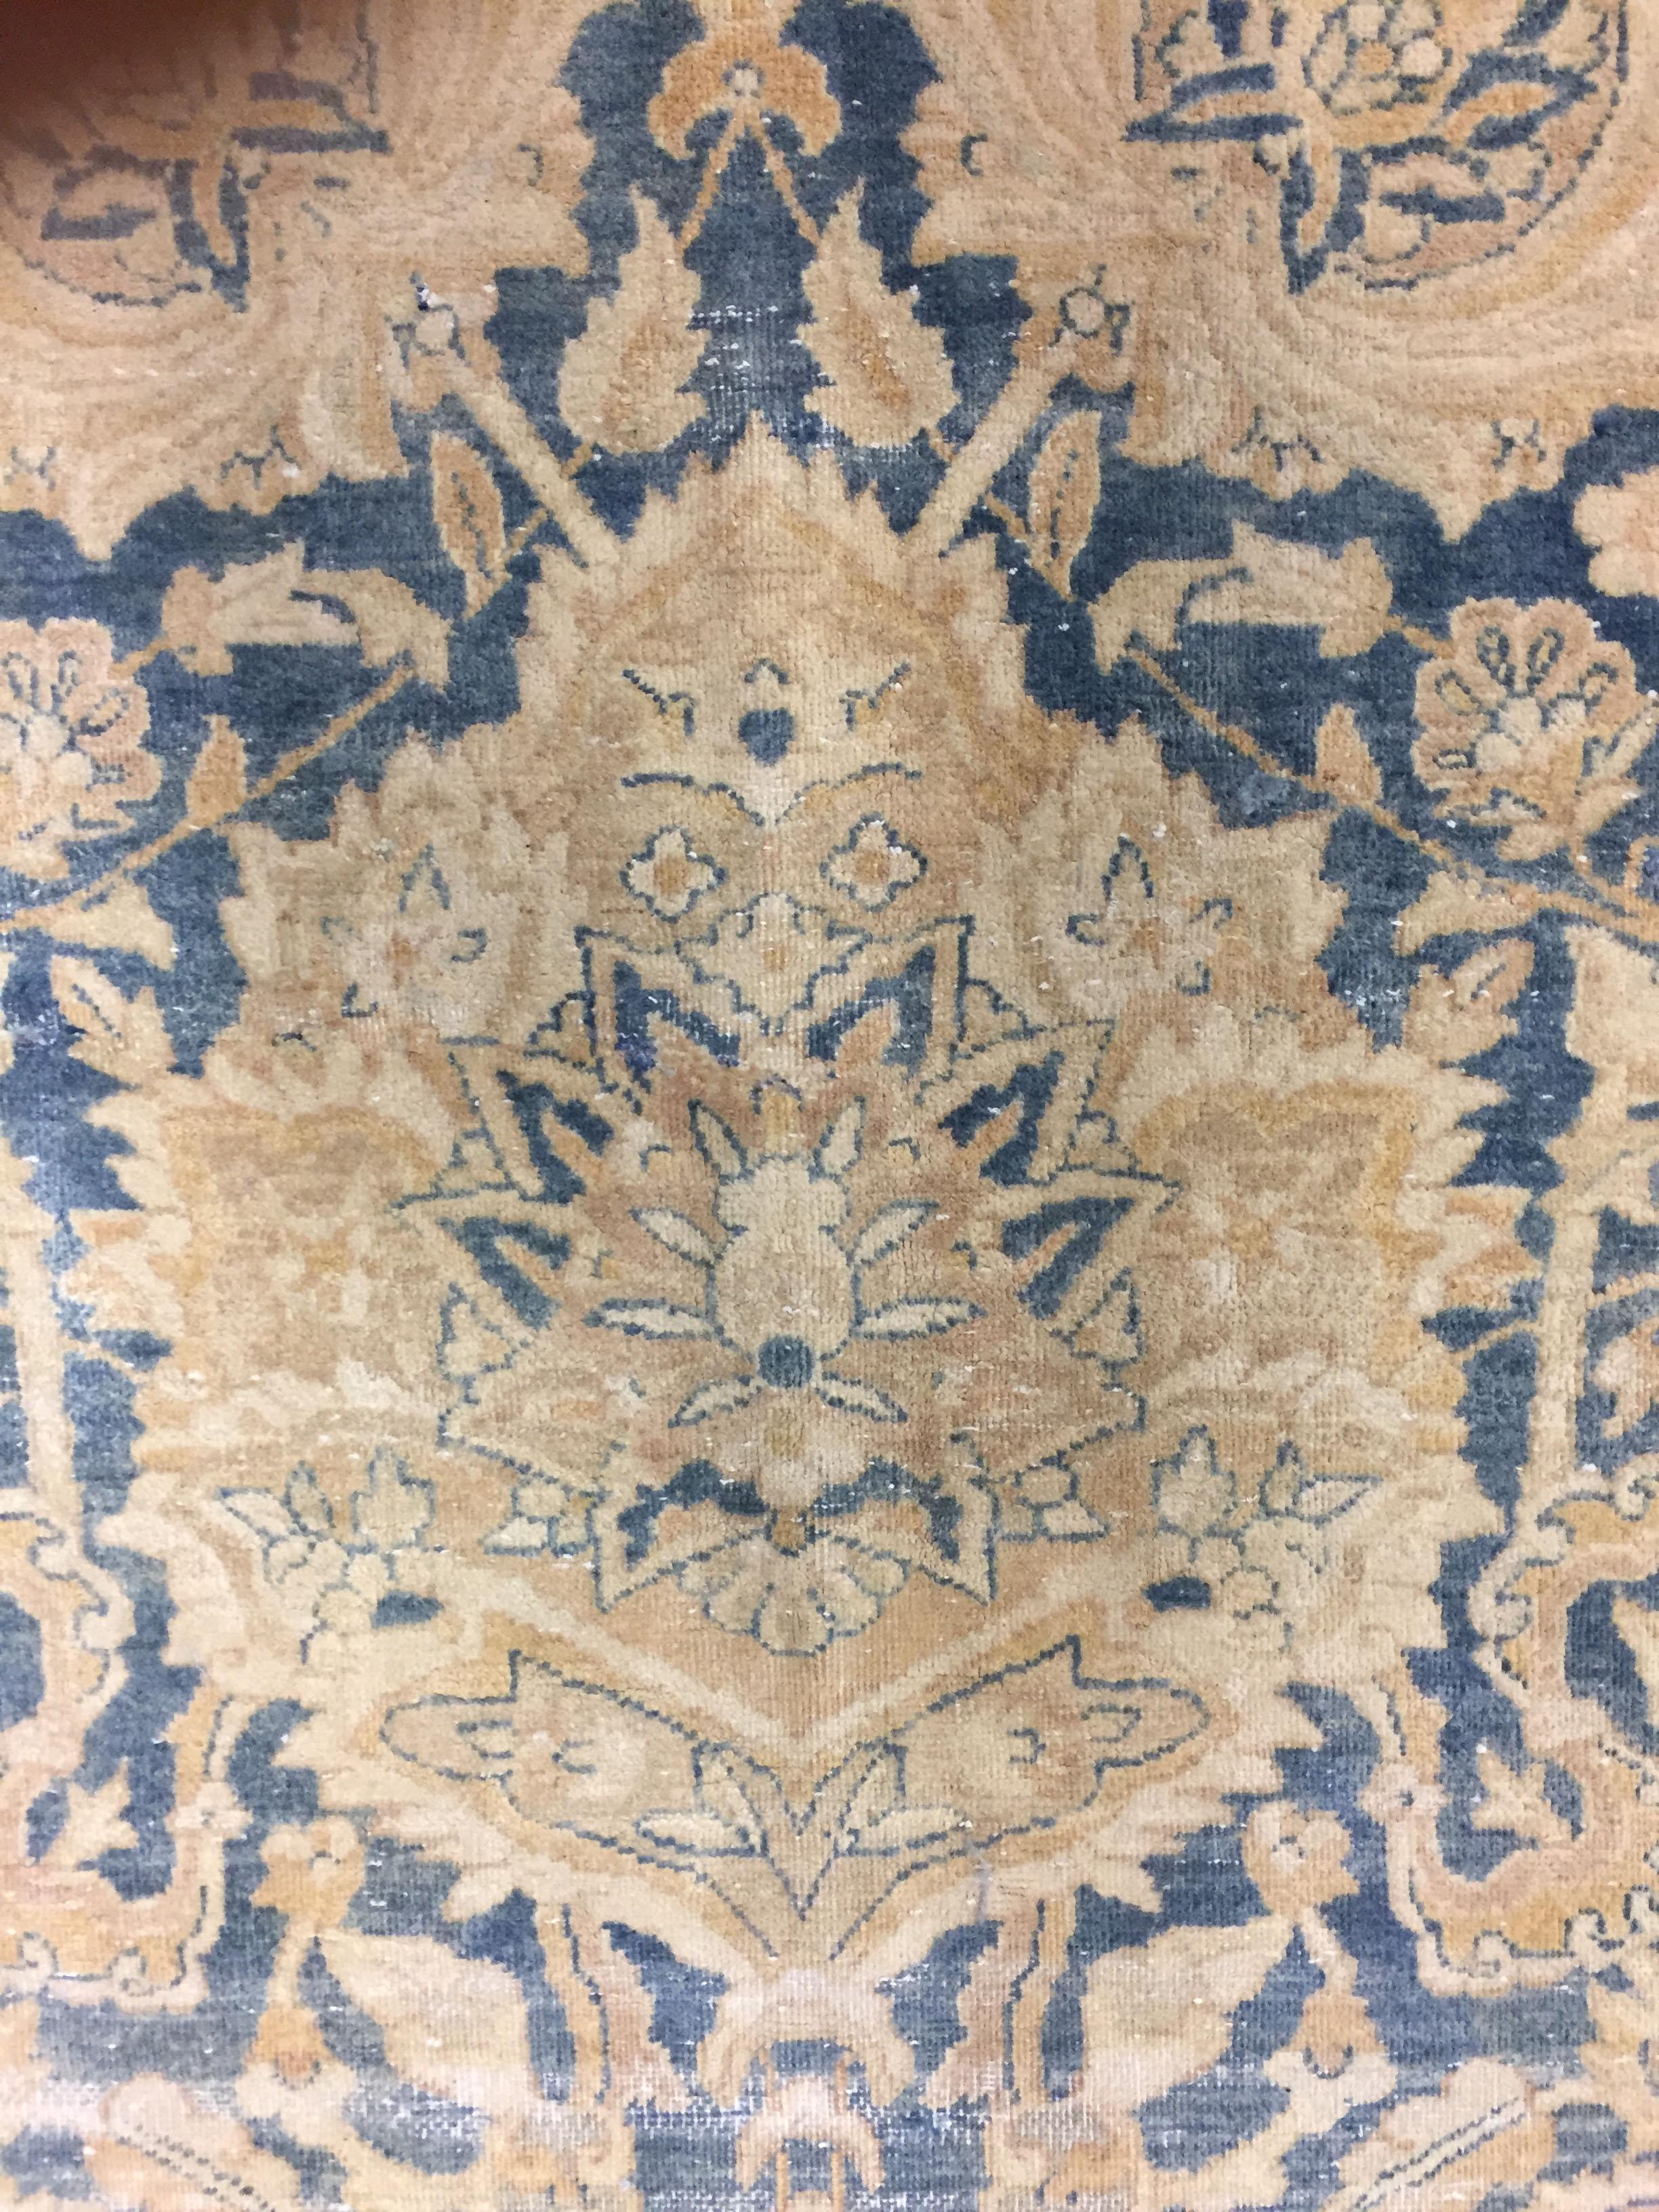 Antique lightly distressed Persian Kirman rug, circa 1890, 9'10 x 13'. From Kirman in Persia this is an antique, circa 1890 hand knotted rug. The condition is distressed, shabby chic. The rug is solid but with low pile and a distressed look that